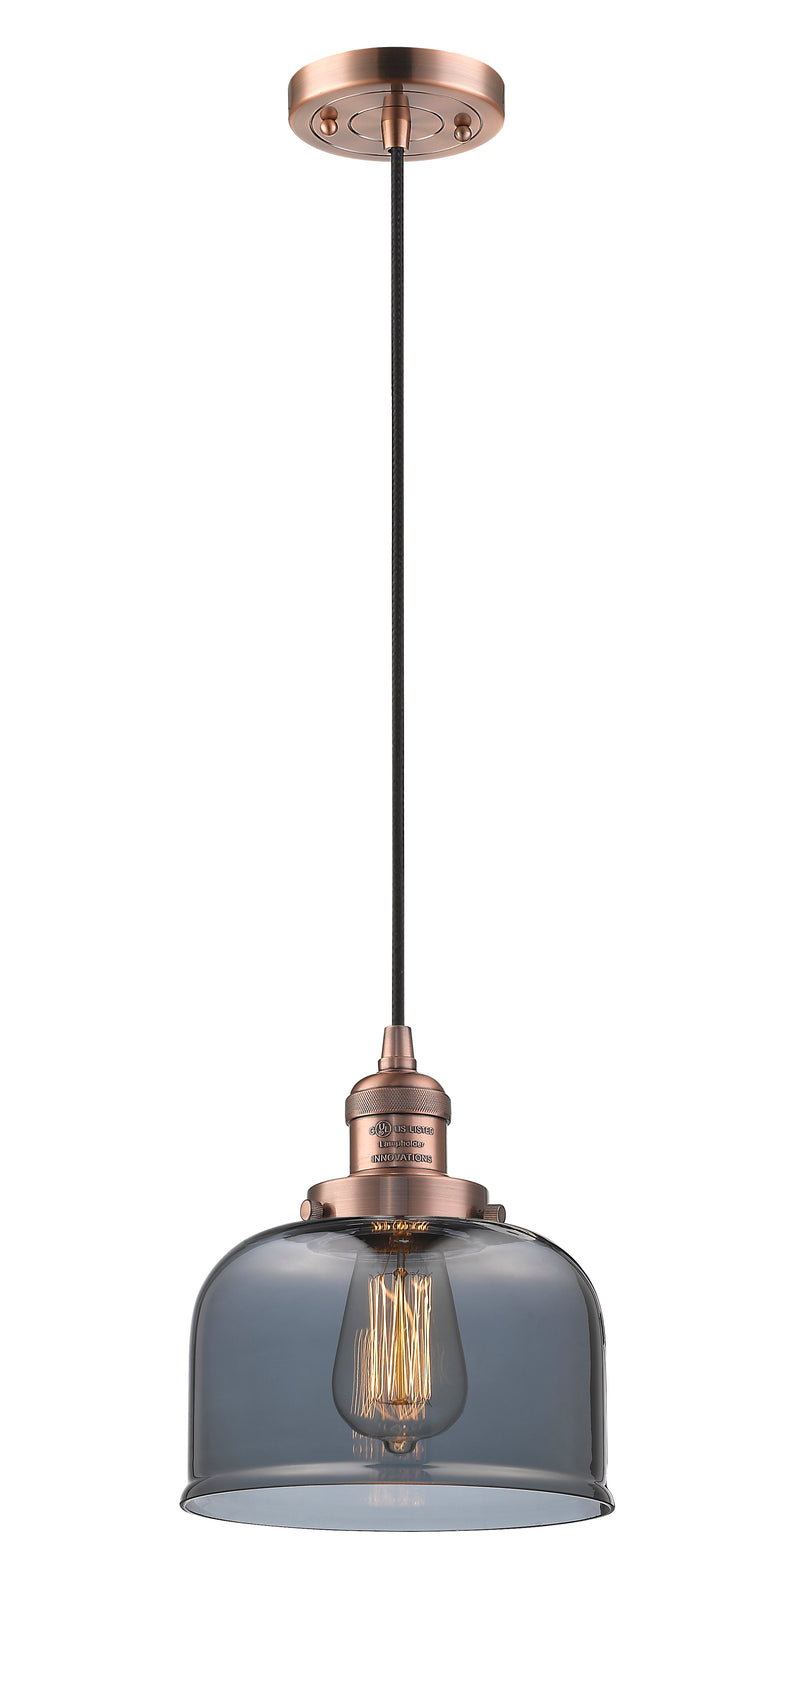 Innovations Lighting Large Bell 1-100 watt 8 inch Antique Copper Mini Pendant with Smoked glass 201CACG73